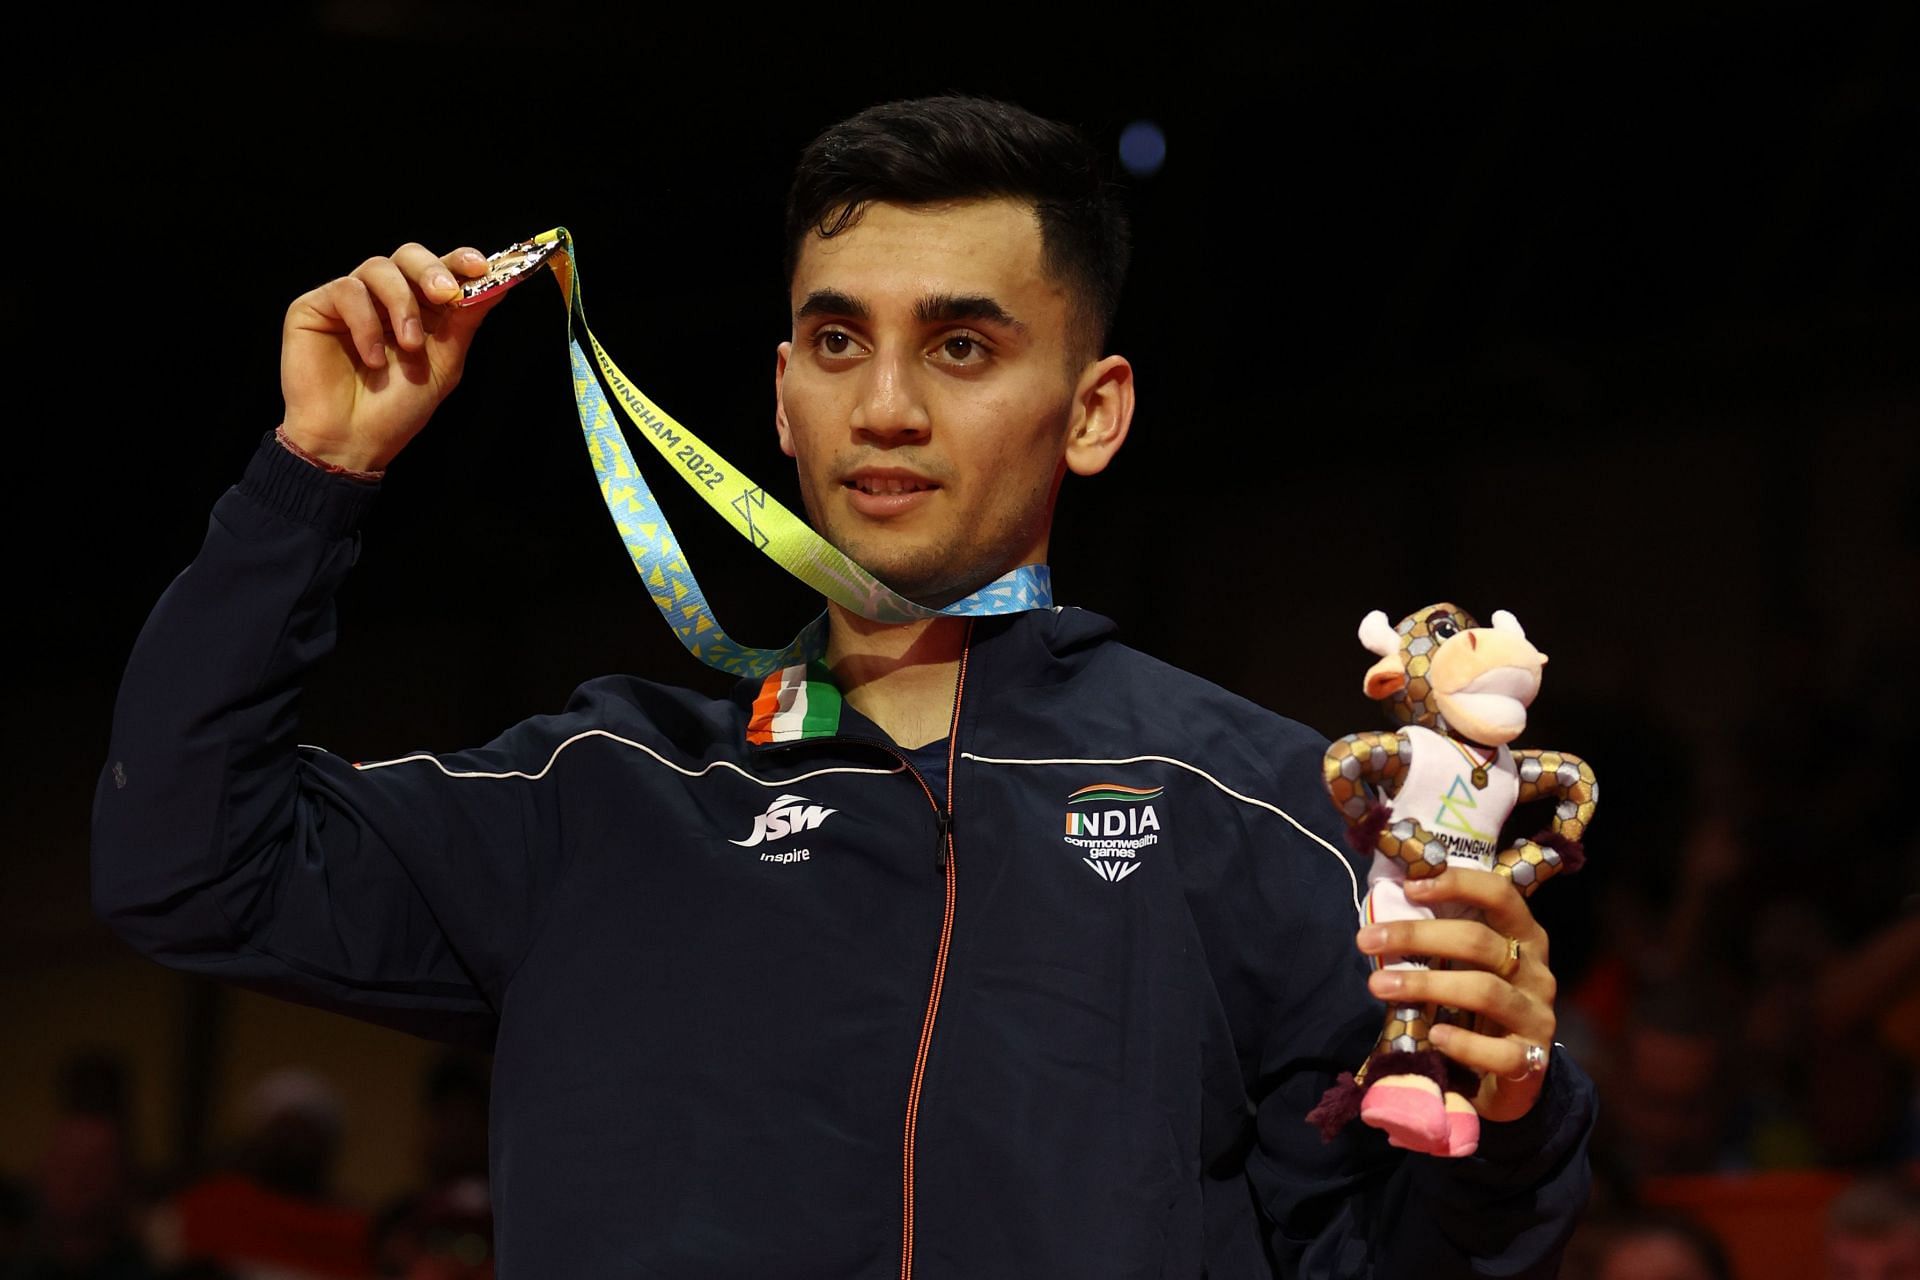 Lakshya Sen with his gold medal at the 2022 Commonwealth Games (Image: Getty)